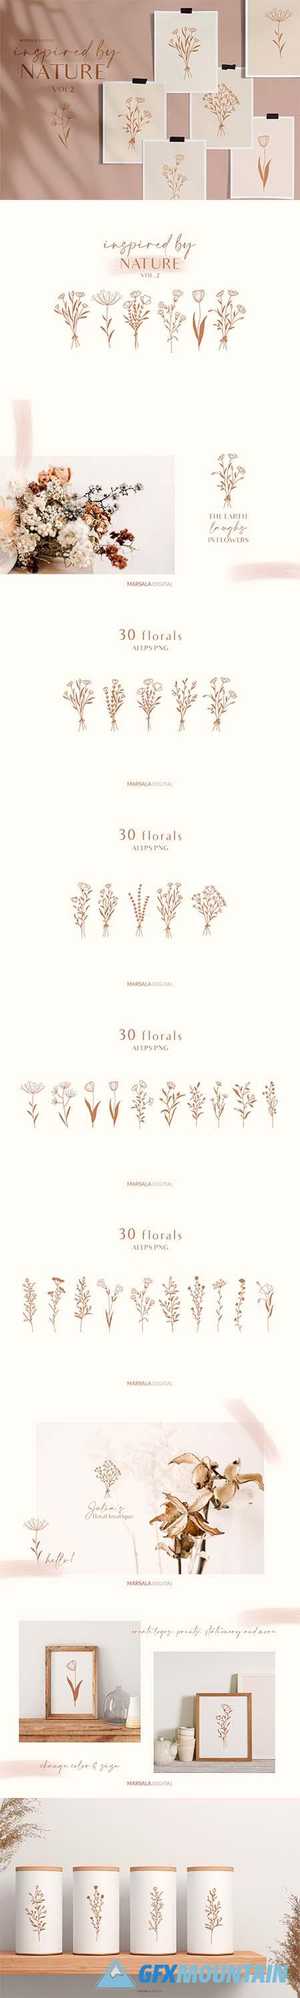 Floral Line Drawings Logo Elements 4458426